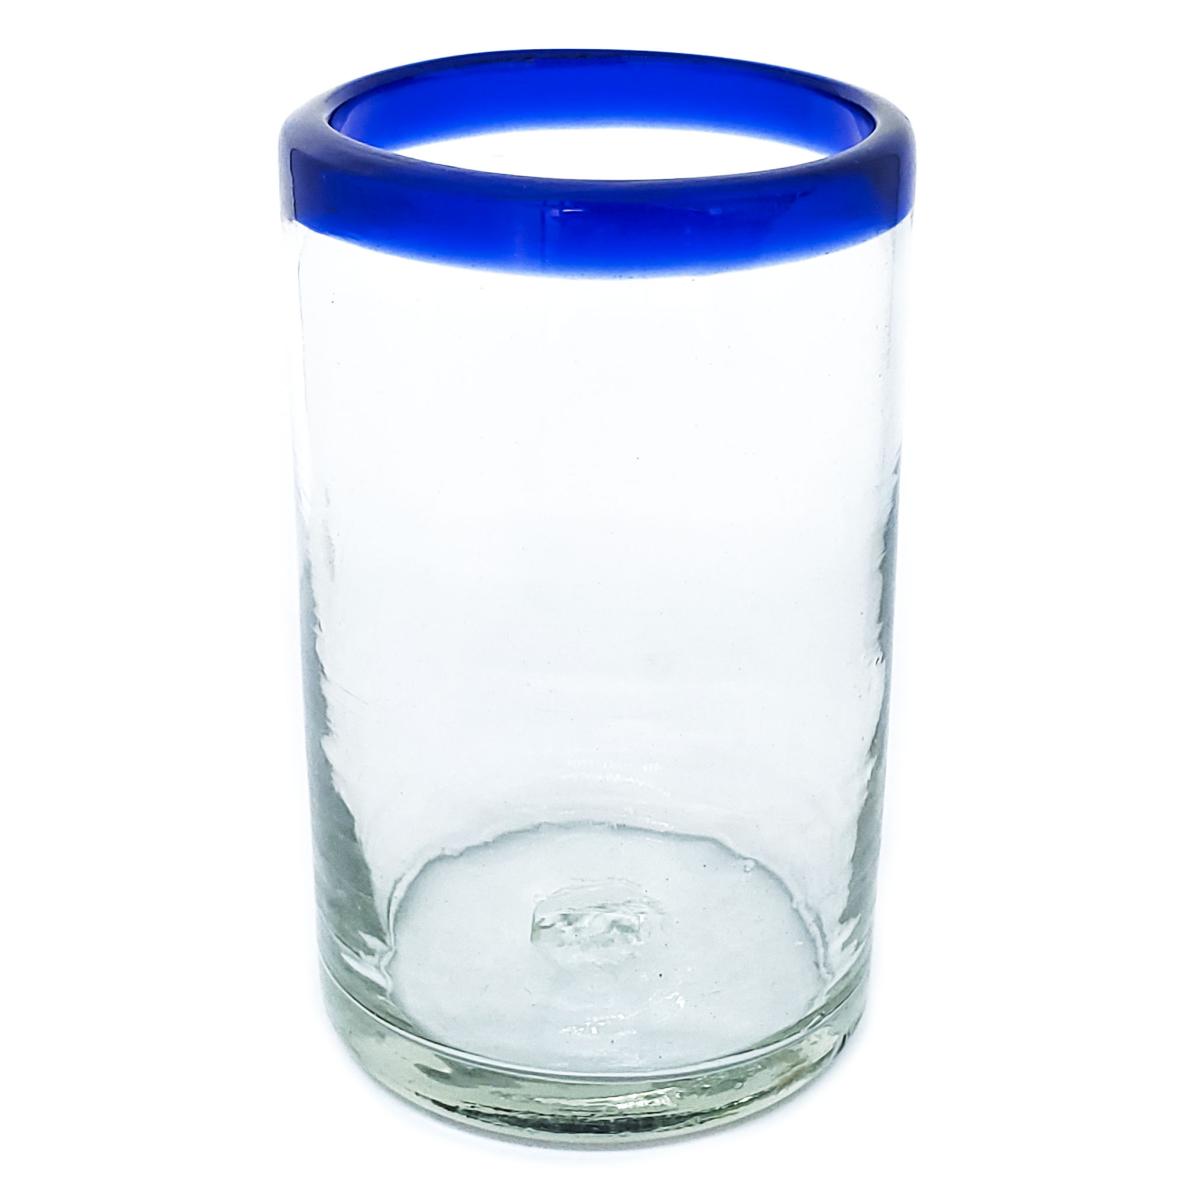 Sale Items / Cobalt Blue Rim 14 oz Drinking Glasses (set of 6) / These handcrafted glasses deliver a classic touch to your favorite drink.